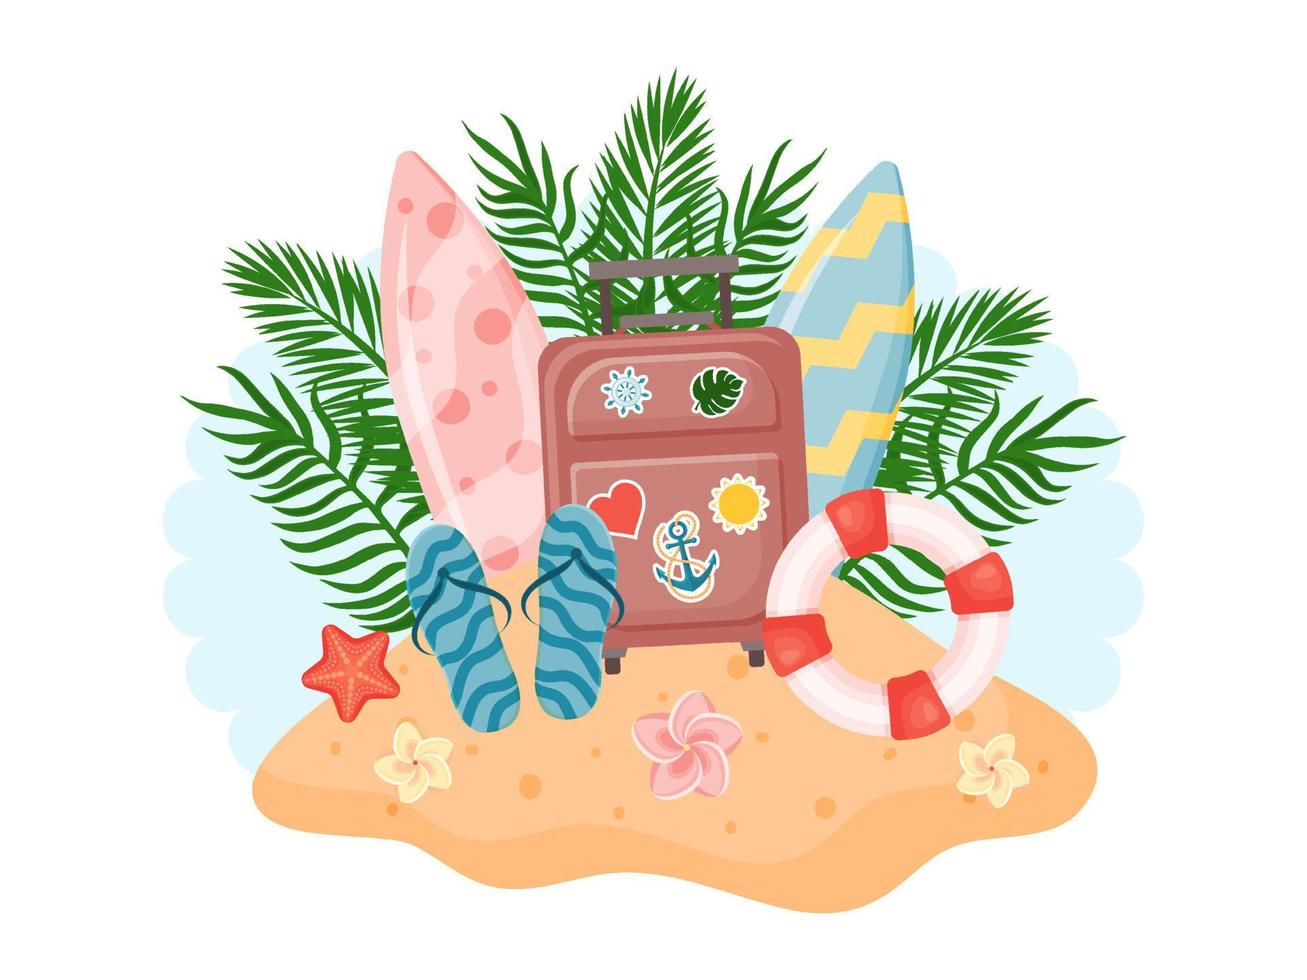 Beach island with summer elements in blue sky background. Vector illustration. Cartoon style. Isolated on white.